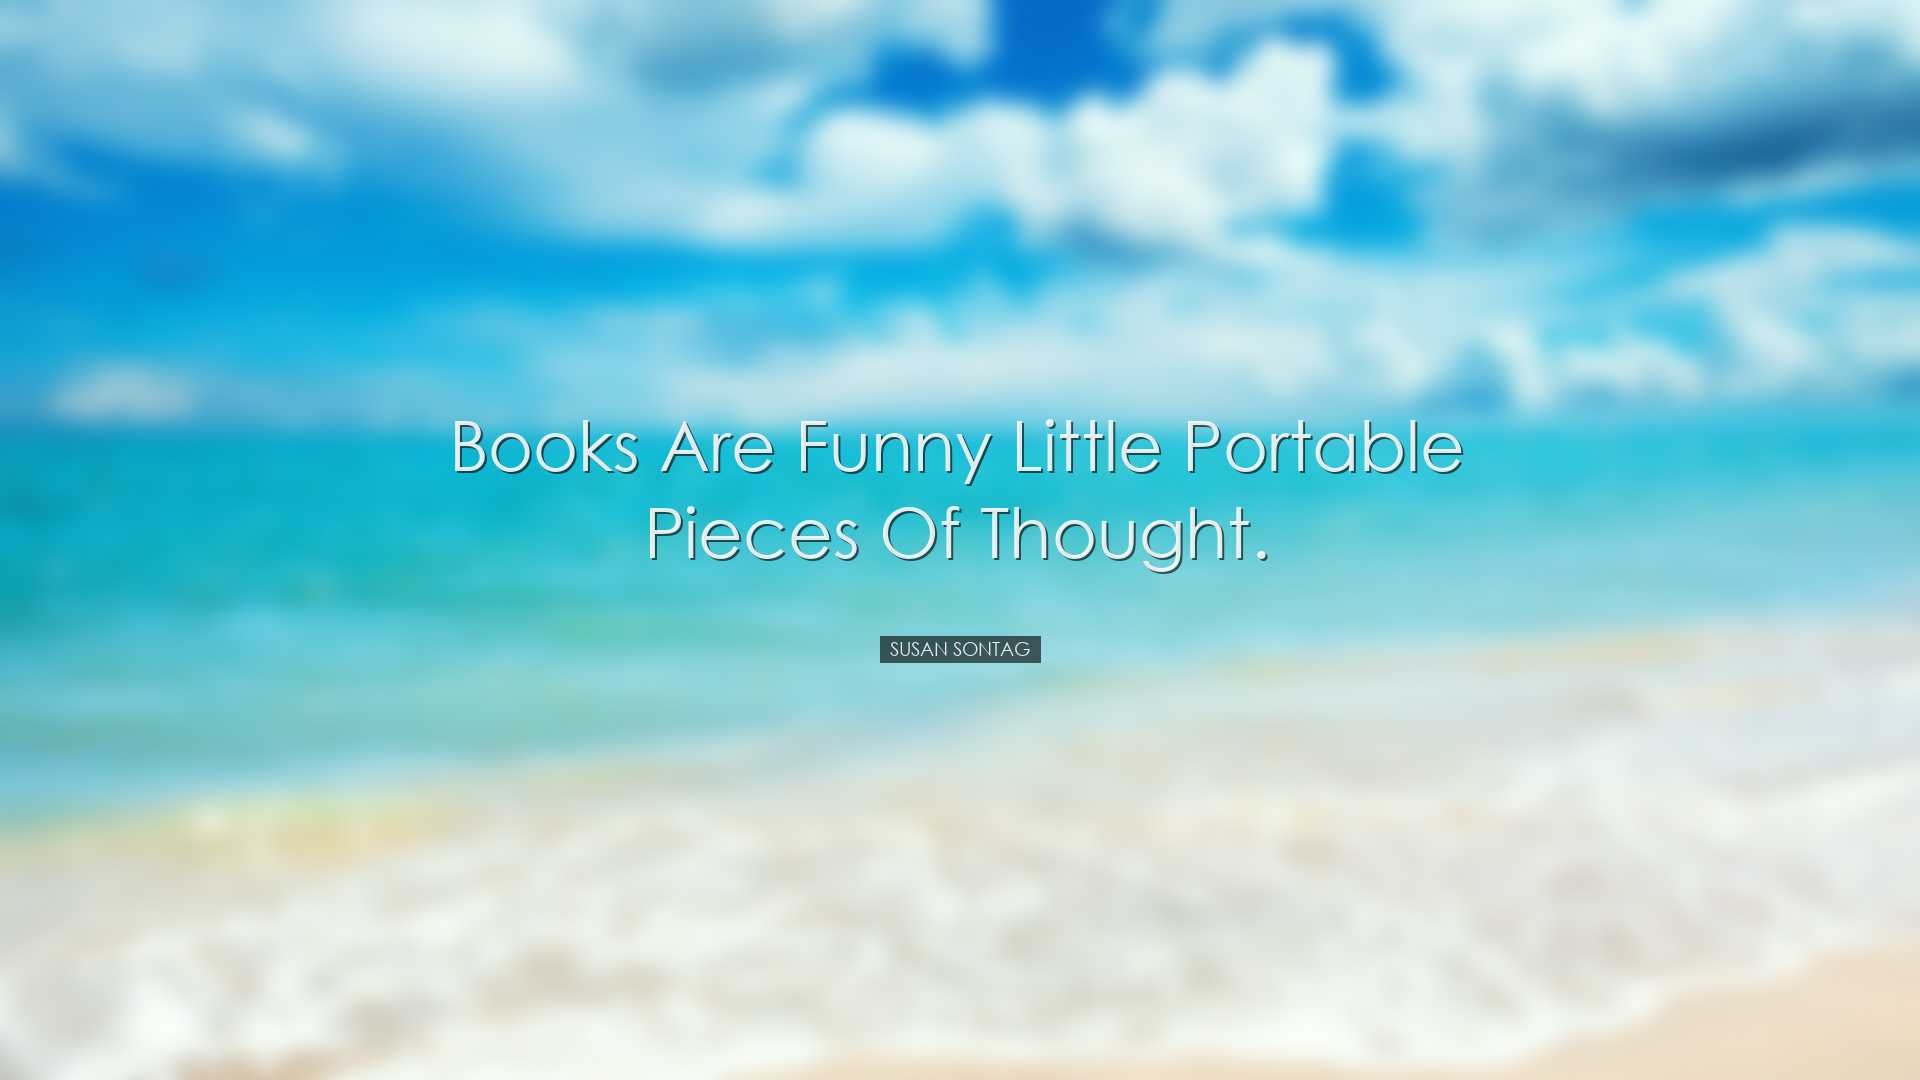 Books are funny little portable pieces of thought. - Susan Sontag